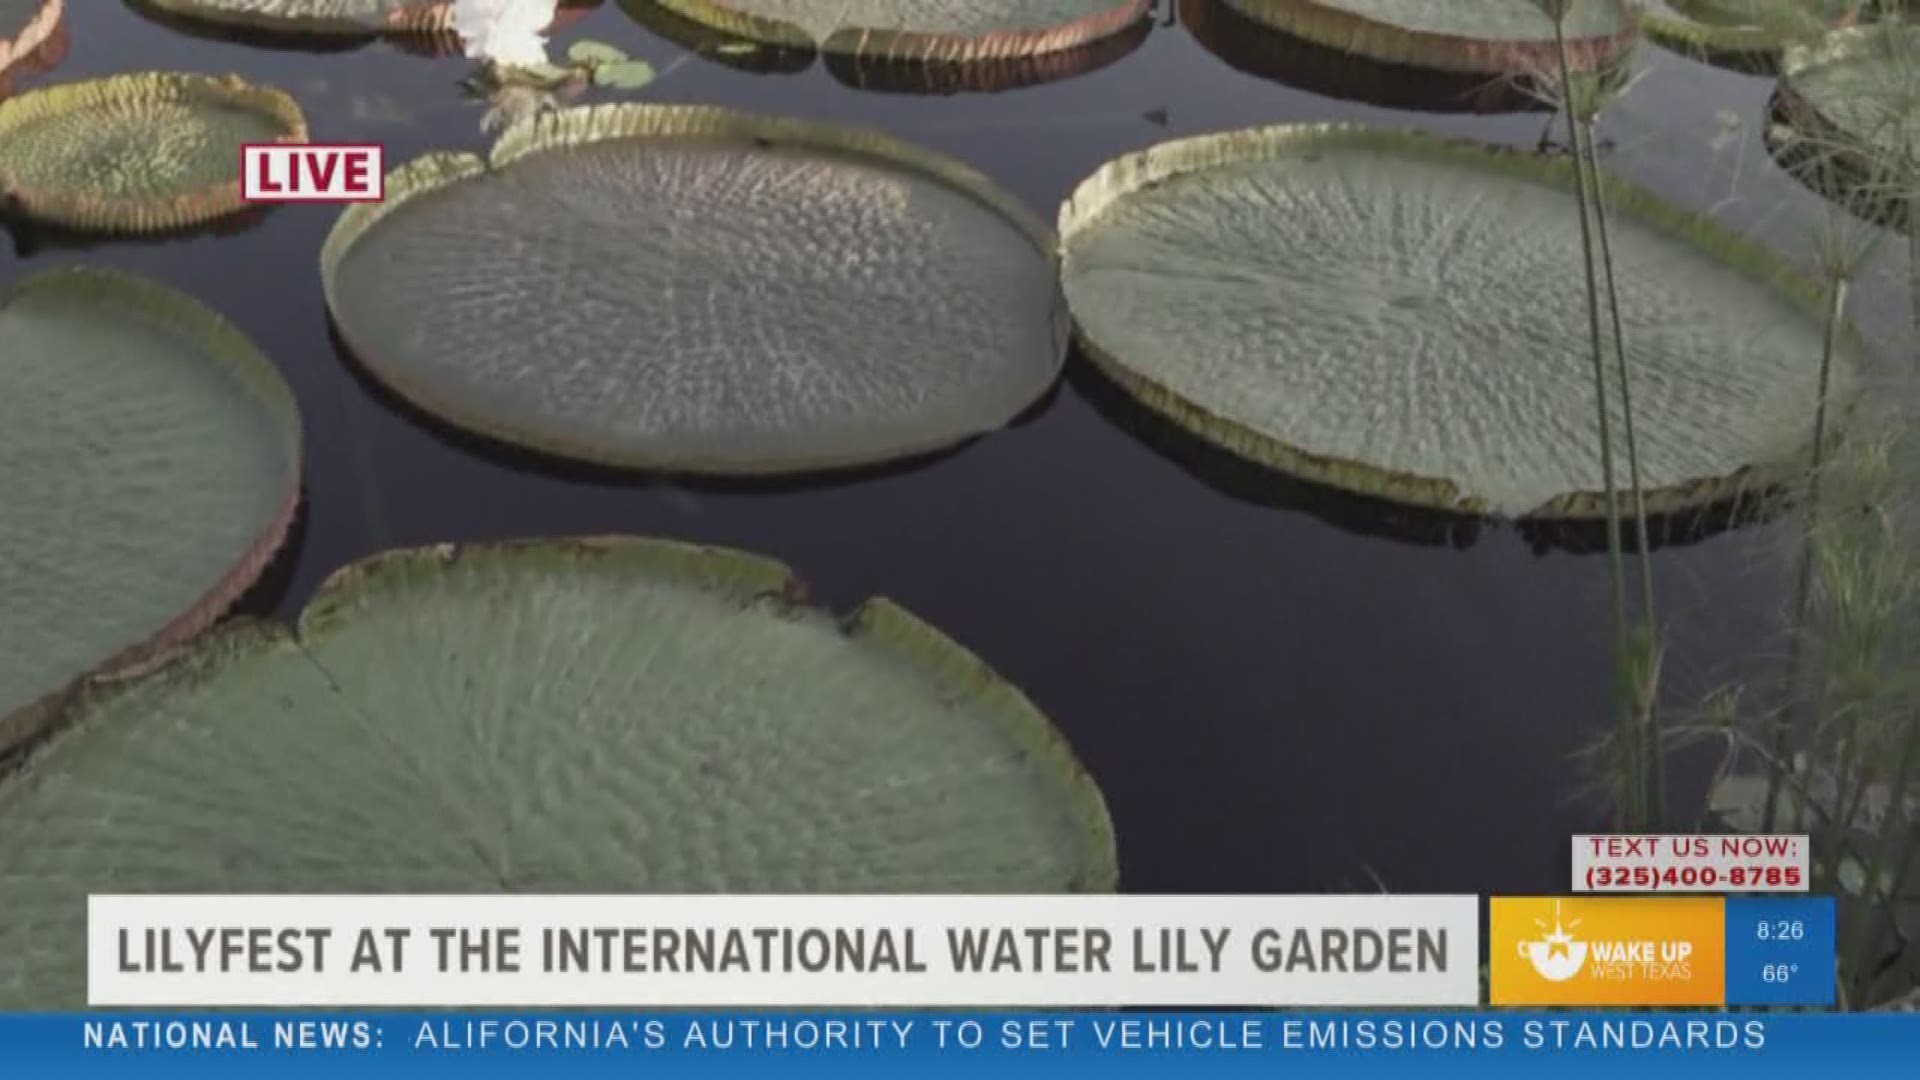 Our Malik Mingo spoke with a member of the San Angelo Garden Club about Lilyfest, which is scheduled for September 21 at 9 a.m. at the International Water Lily Collection.